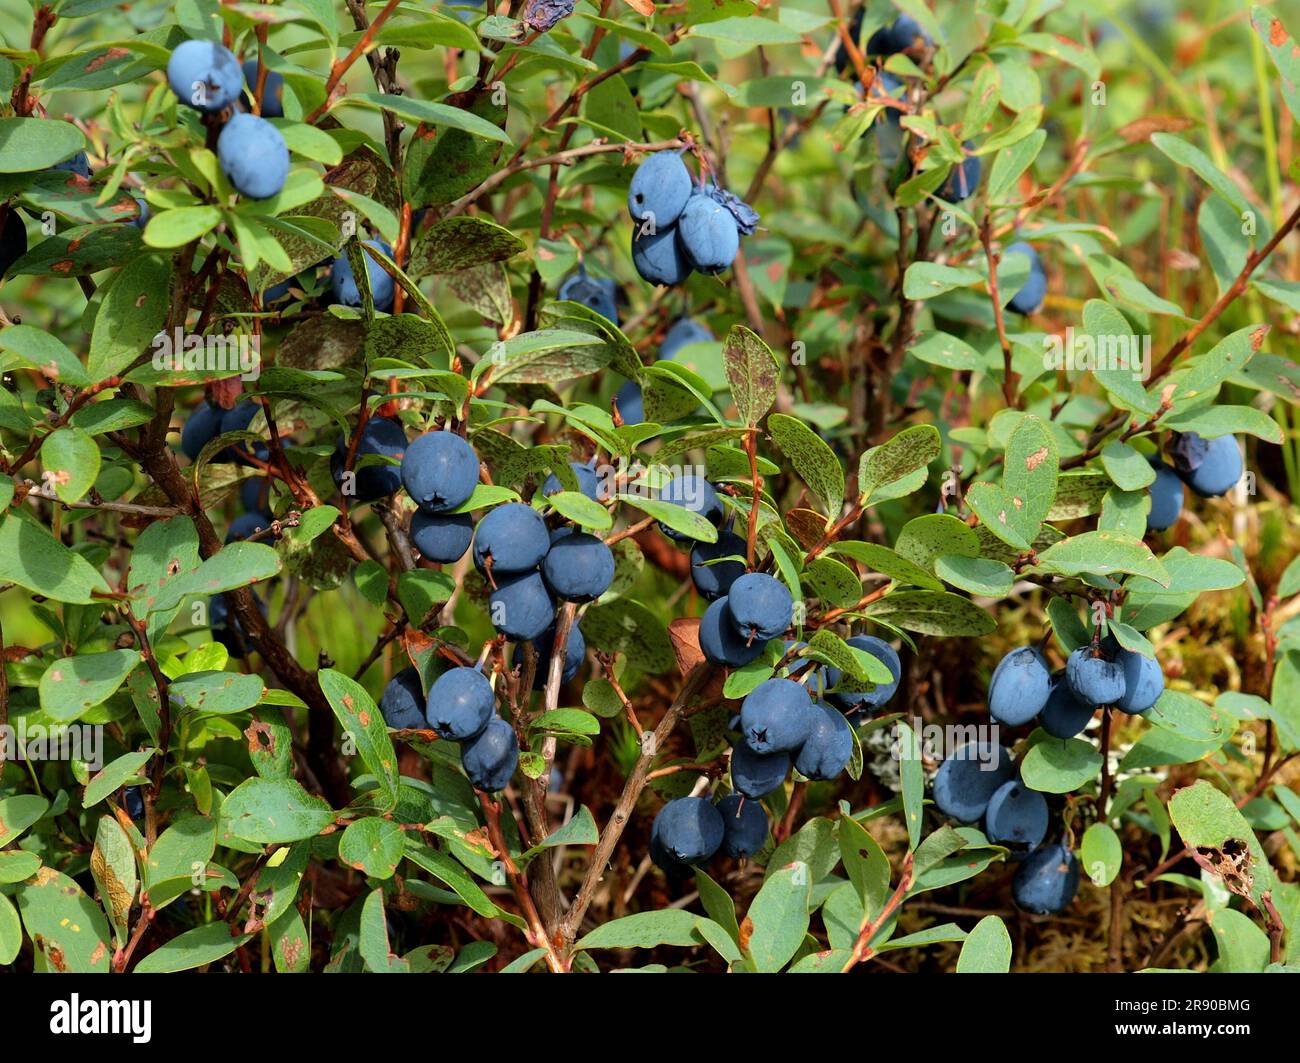 Vaccinium uliginosum (bog bilberry) (bog blueberry) (northern bilberry or western blueberry) is a flowering plant in the genus Vaccinium within the Stock Photo